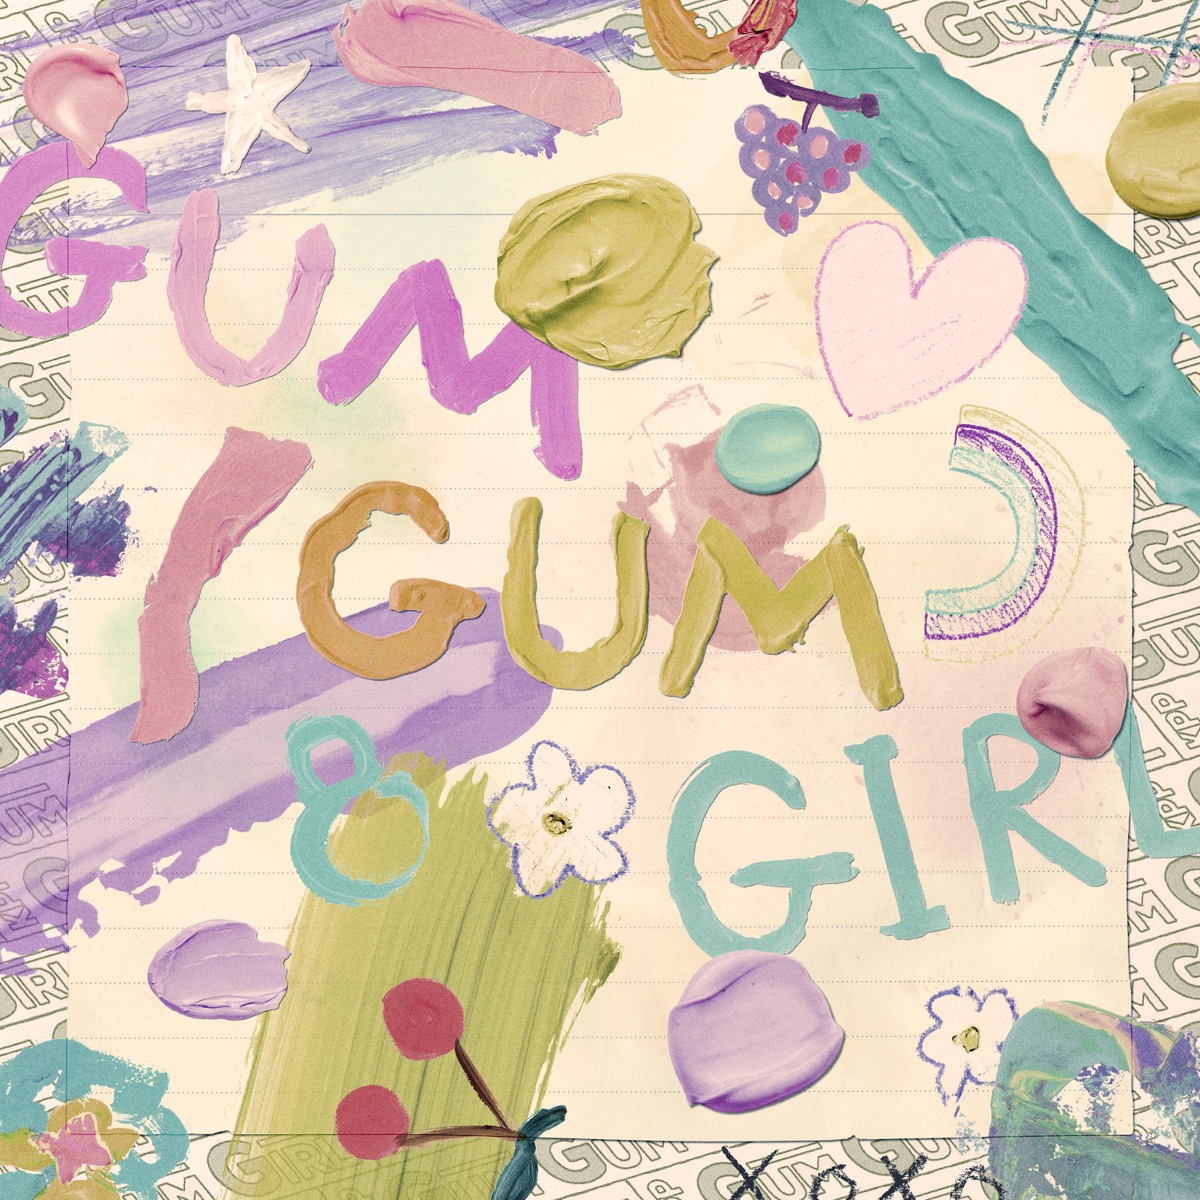 Cover art for『Kyary Pamyu Pamyu - ガムガムガール』from the release『GUM GUM GIRL